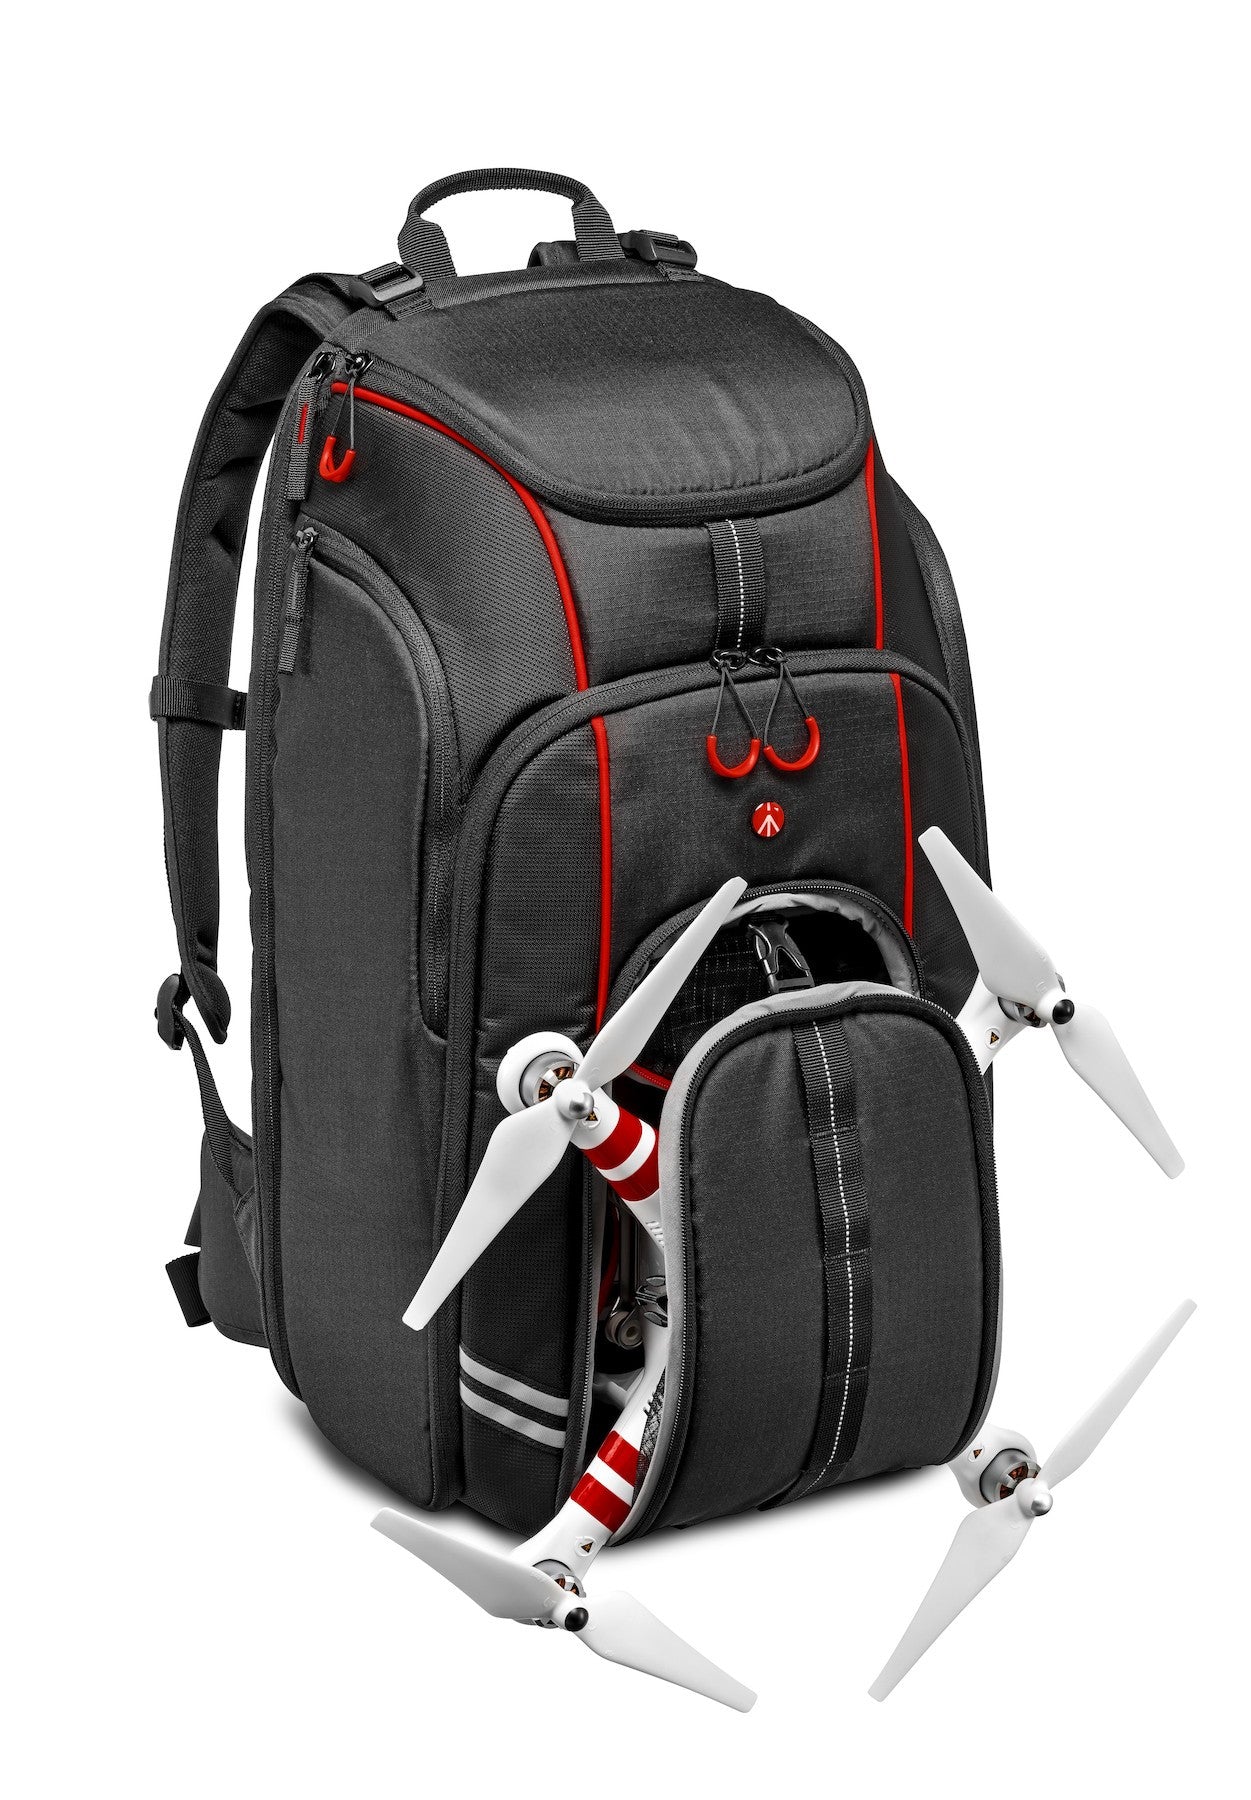 Manfrotto MB BP-D1 Drone Backpack, bags backpacks, Manfrotto - Pictureline  - 1